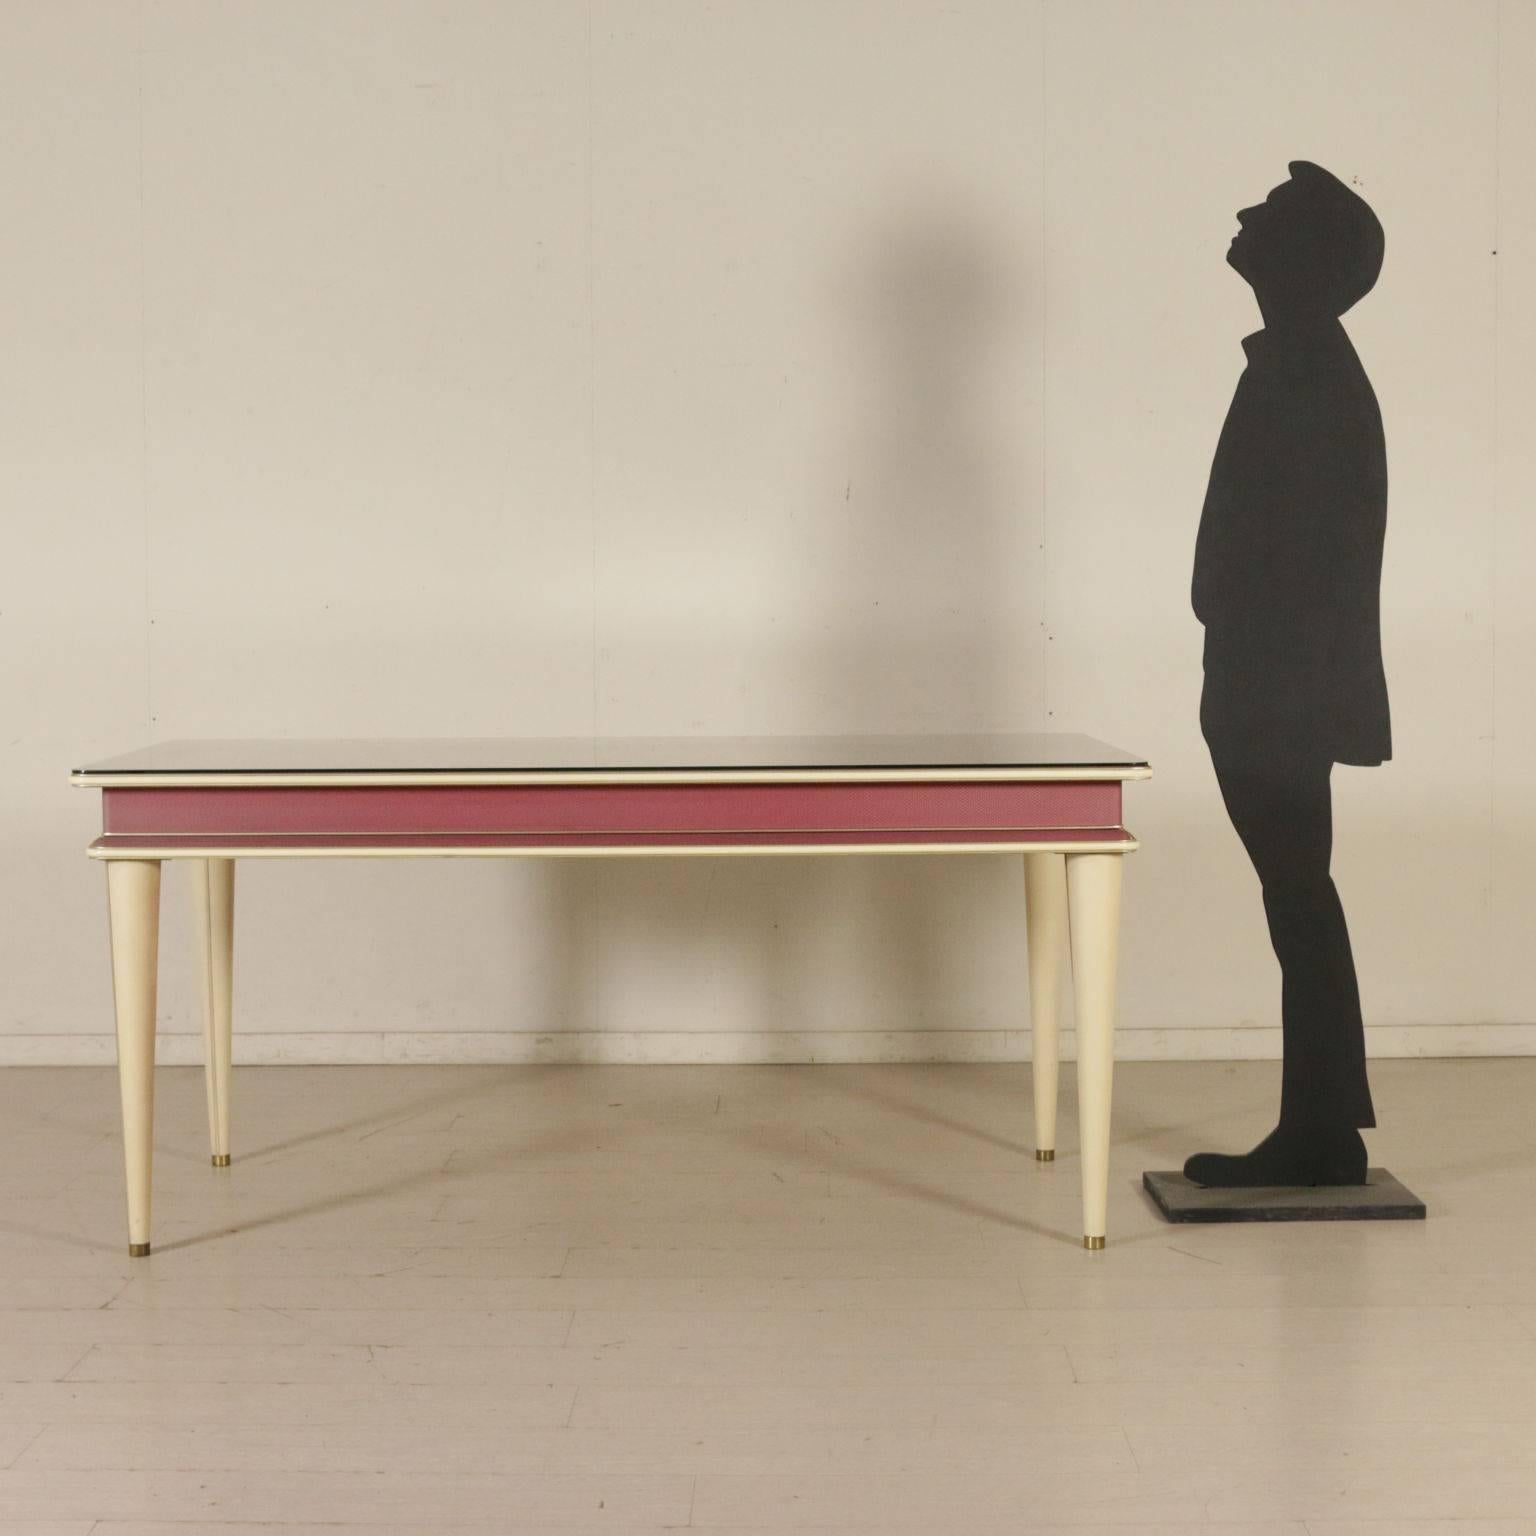 A table designed by Umberto Mascagni. Covered skai, vinyl material and brass outlines, transparent glass on the top. Manufactured in Bologna, Italy, 1950s.